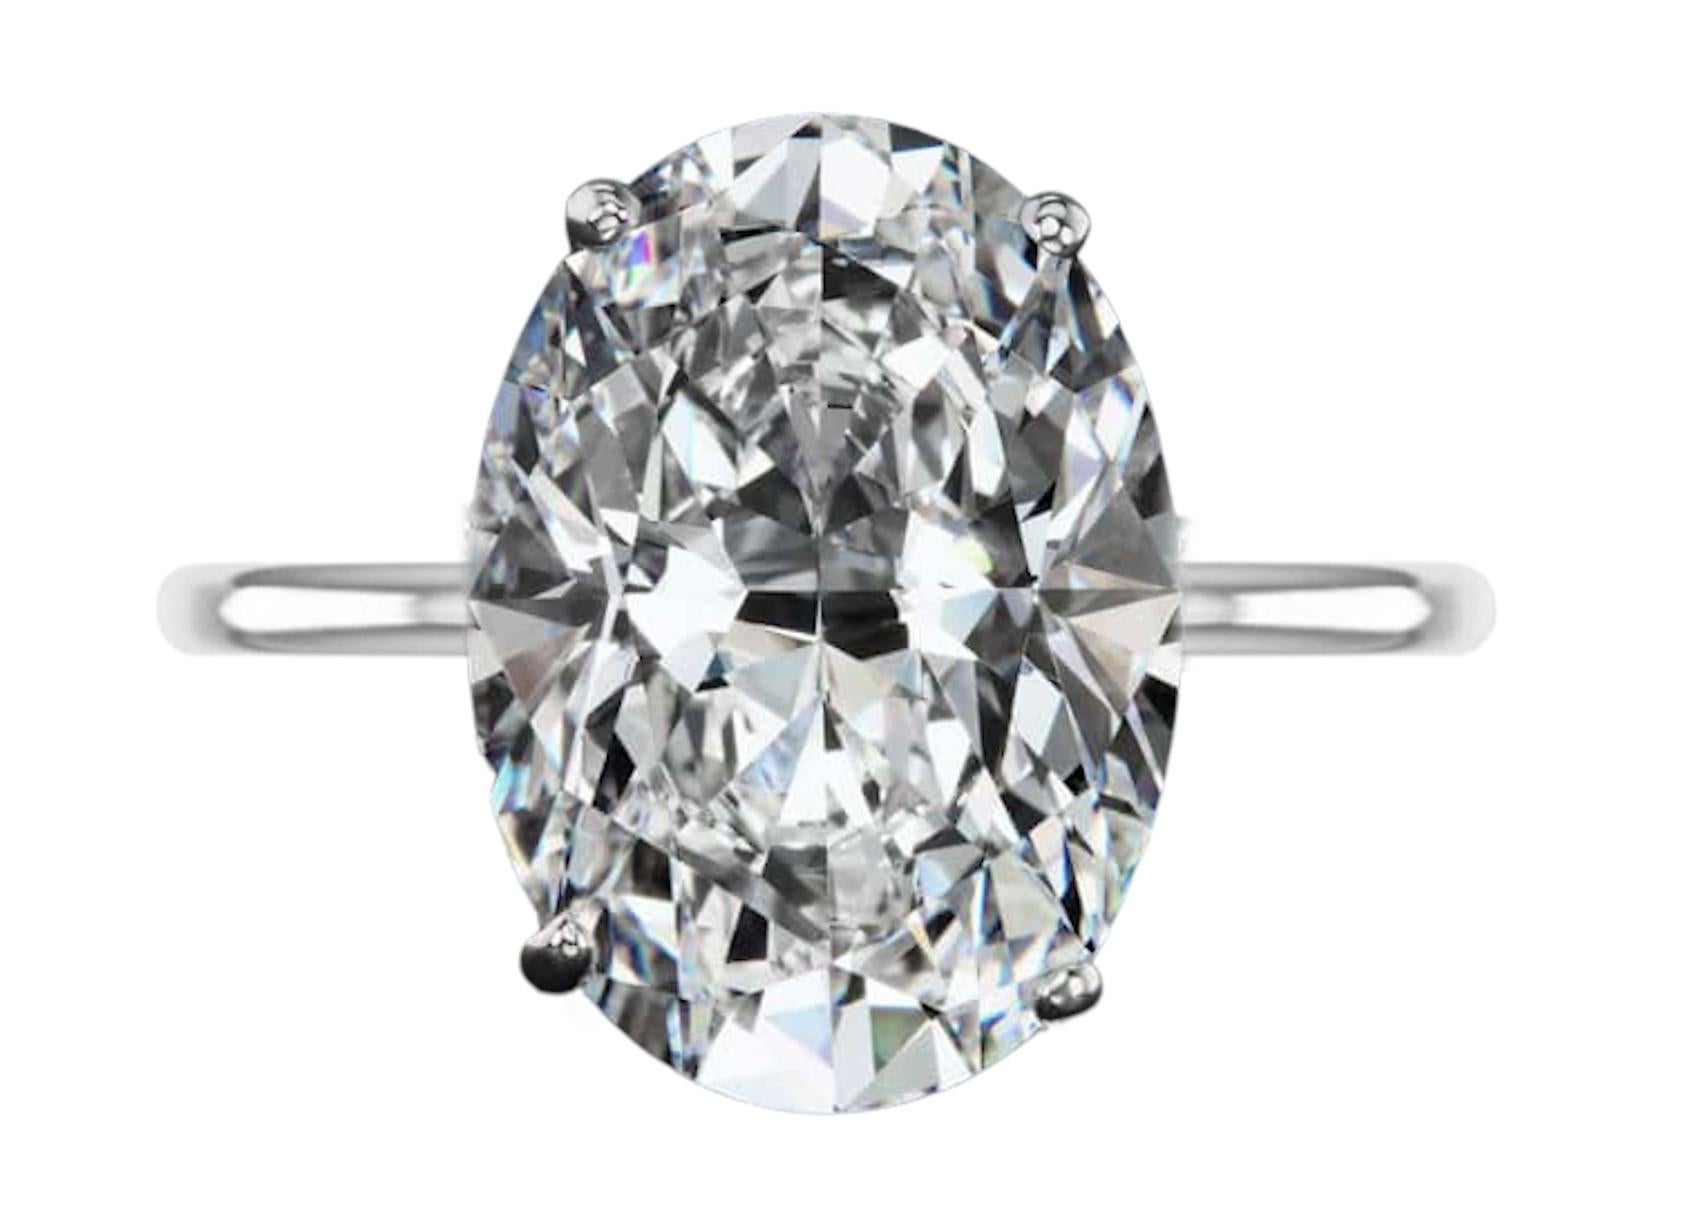 GIA Certified 3 Carat Oval Cut Diamond Solitaire White Gold Ring
The diamond, according to the GIA report, is H in color and VS2 in clarity.
The setting is made in solid 18K white gold.
